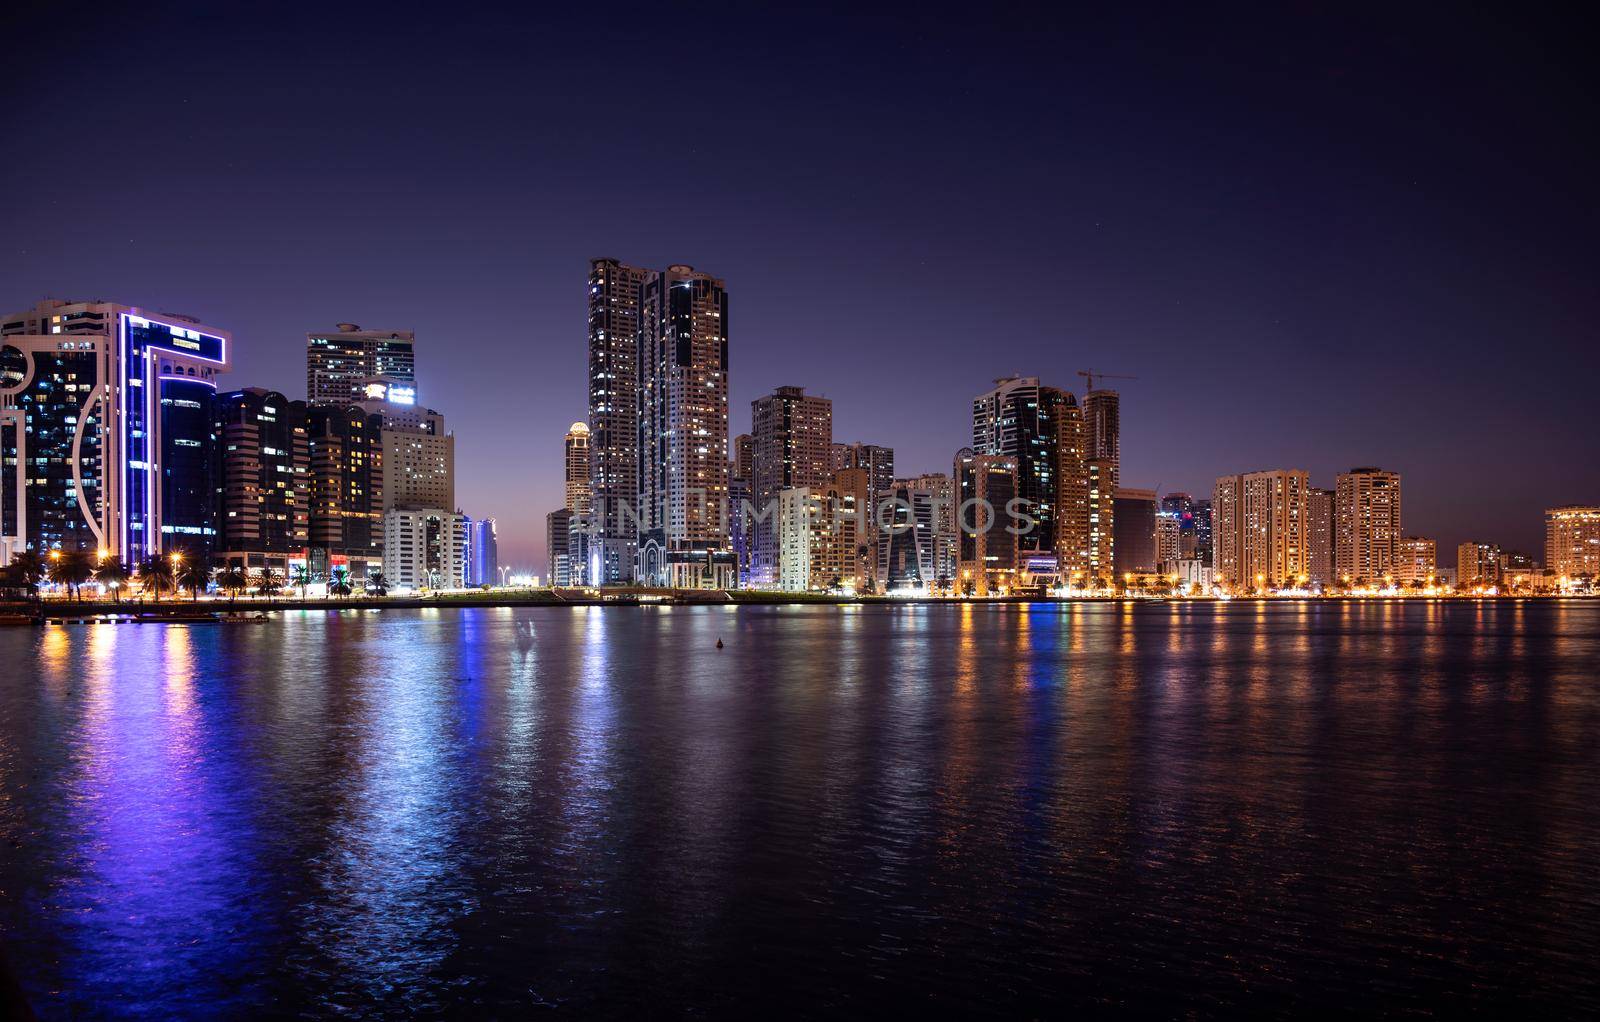 Sharjah,UAE - Dec 2nd 2020. Panoramic view of the illuminated sky scrappers showing beautiful reflections in water captured at the Al Majaz waterfront Sharjah , UAE.